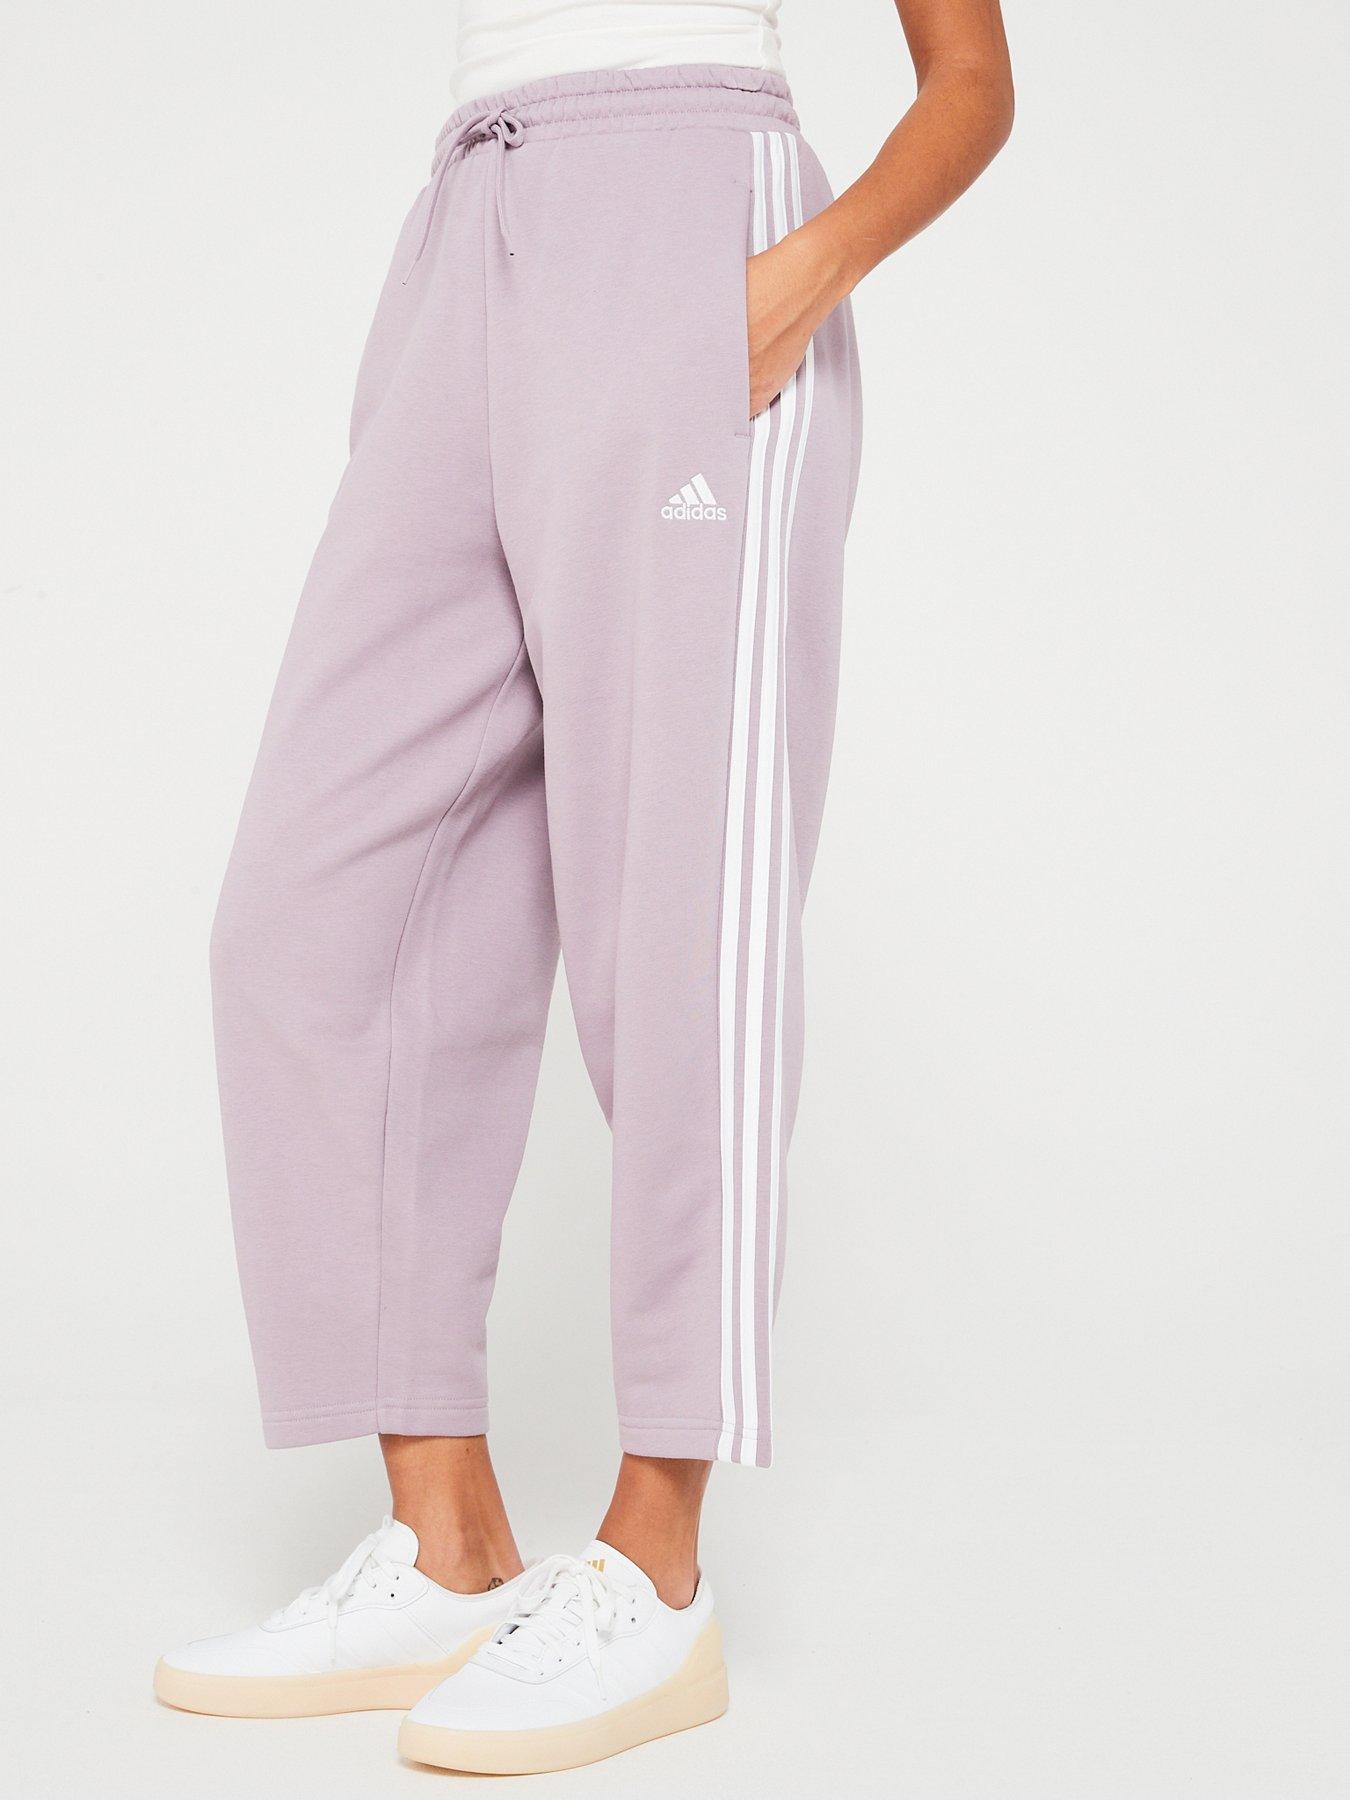 Buy adidas Red 3-Stripes Leggings from Next Ireland